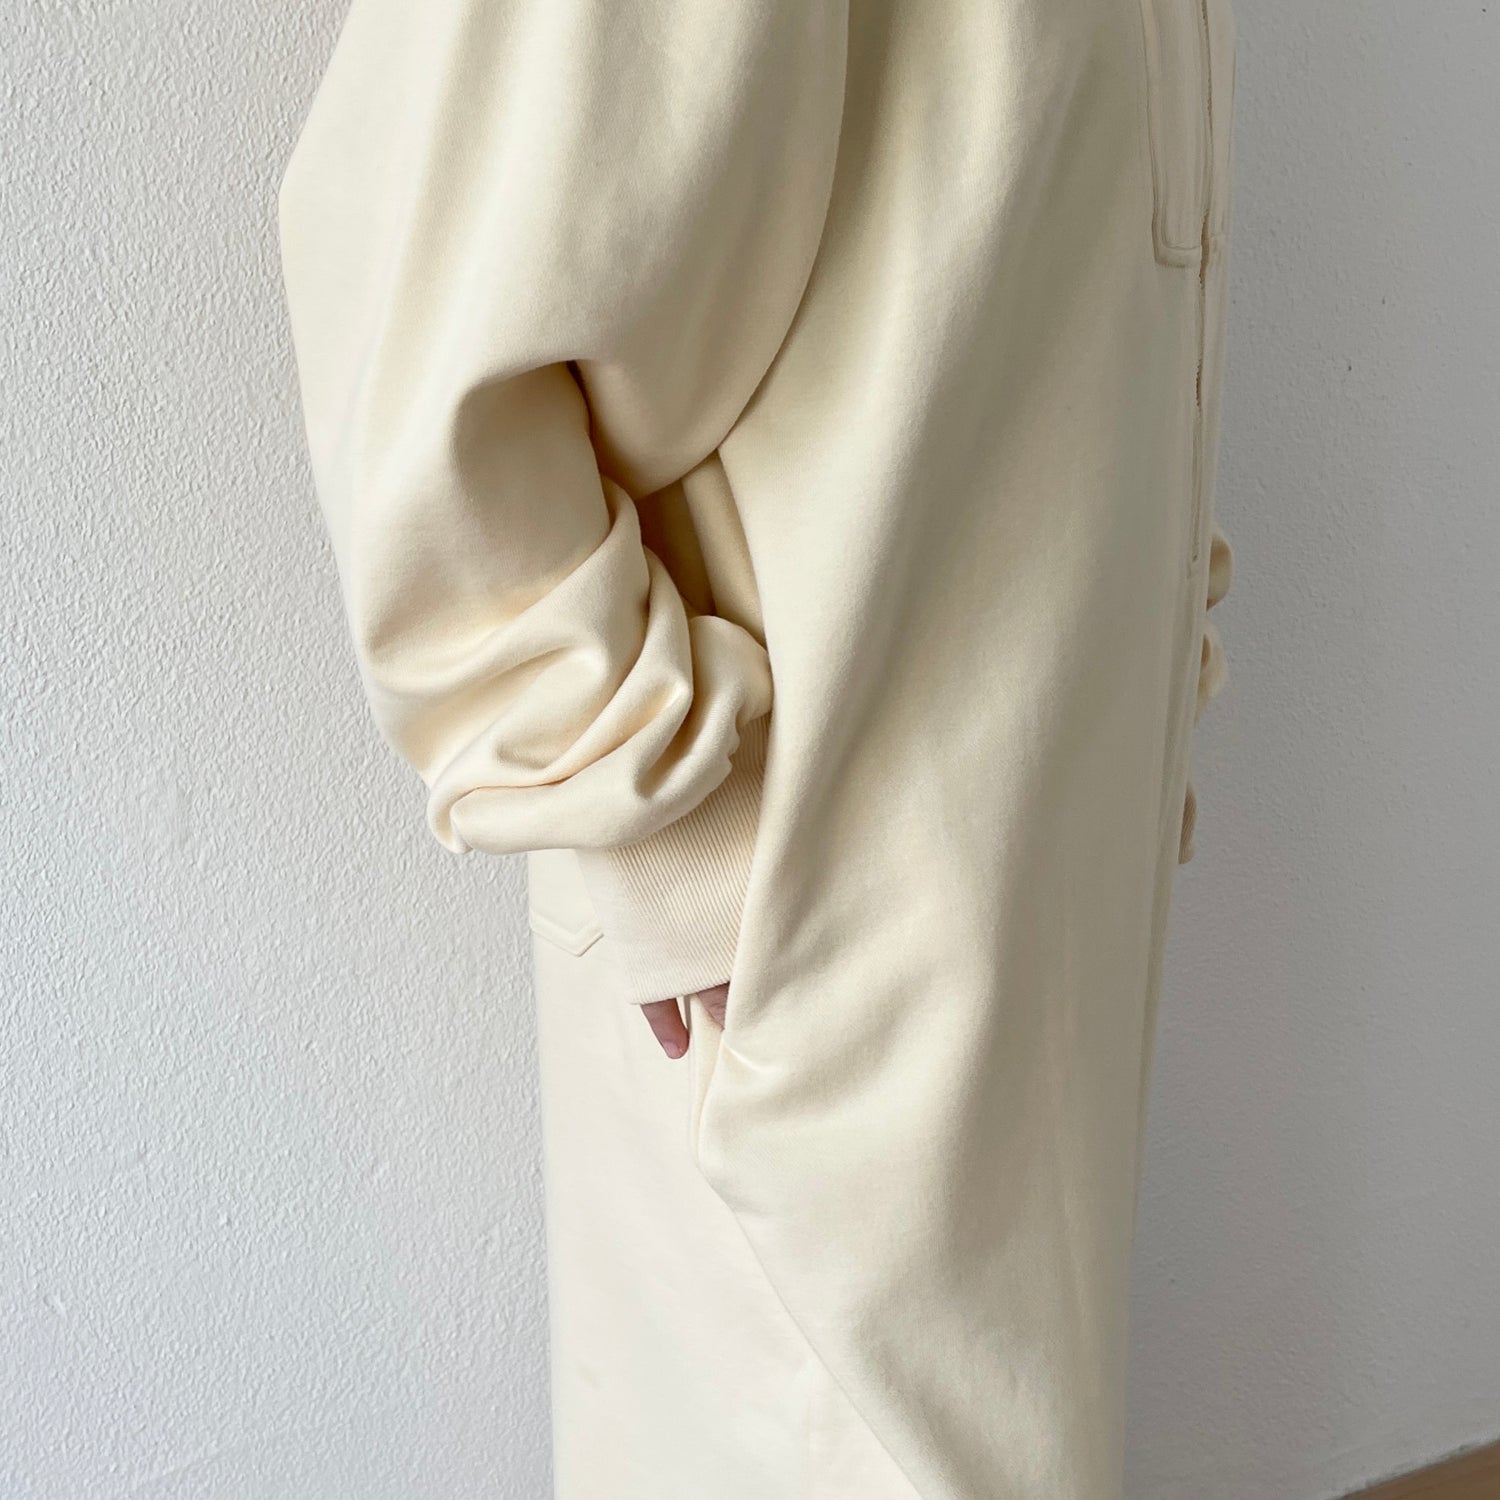 high neck half zip up sweat all in one / ivory